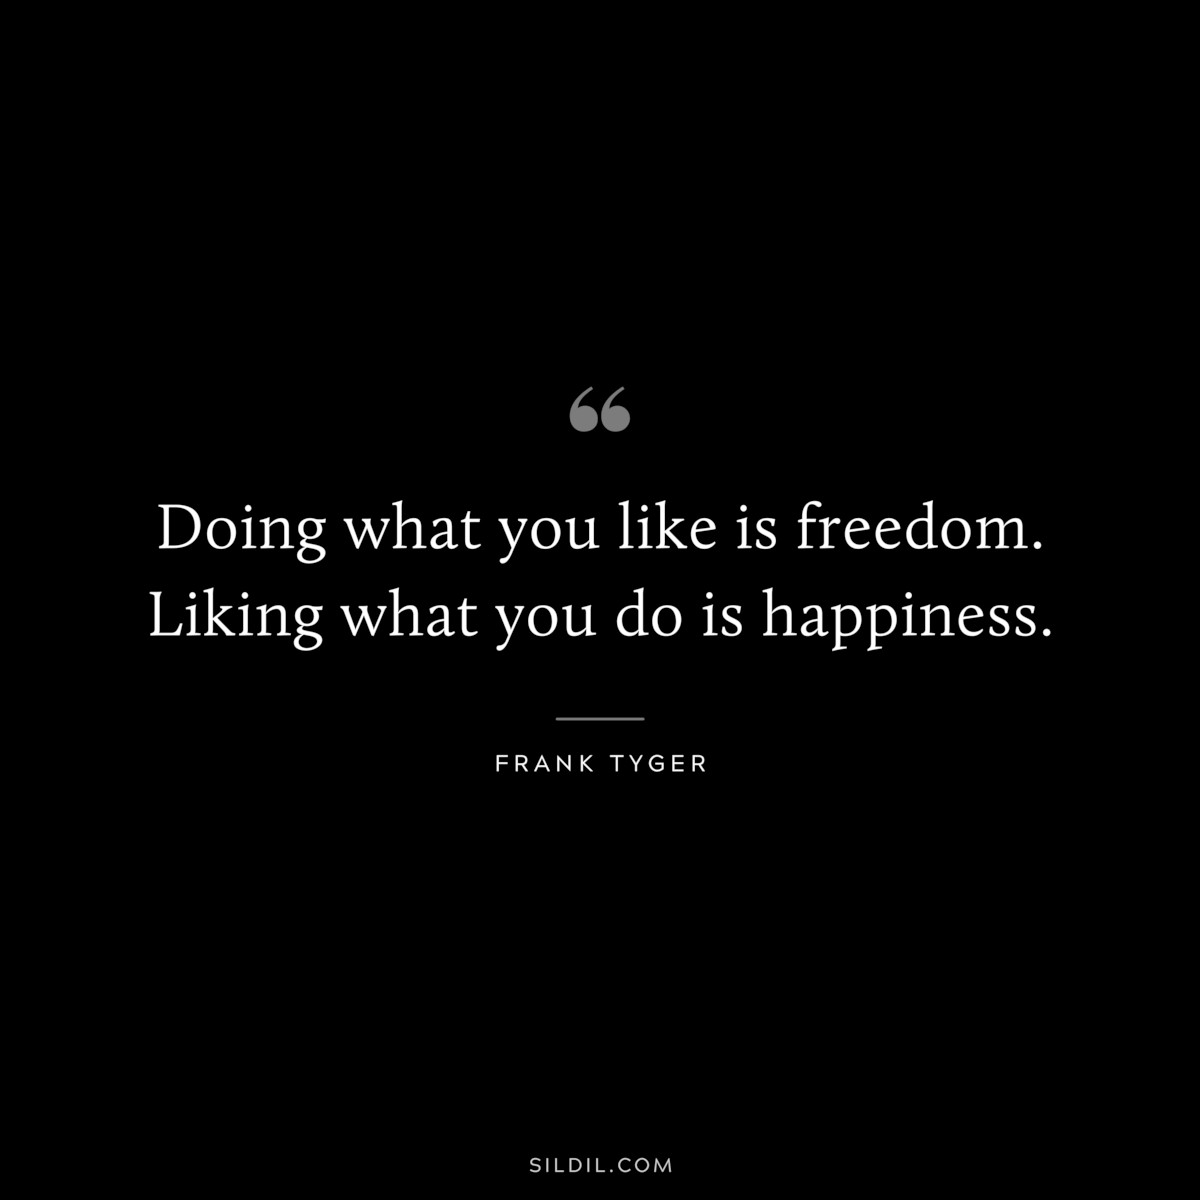 Doing what you like is freedom. Liking what you do is happiness. ― Frank Tyger